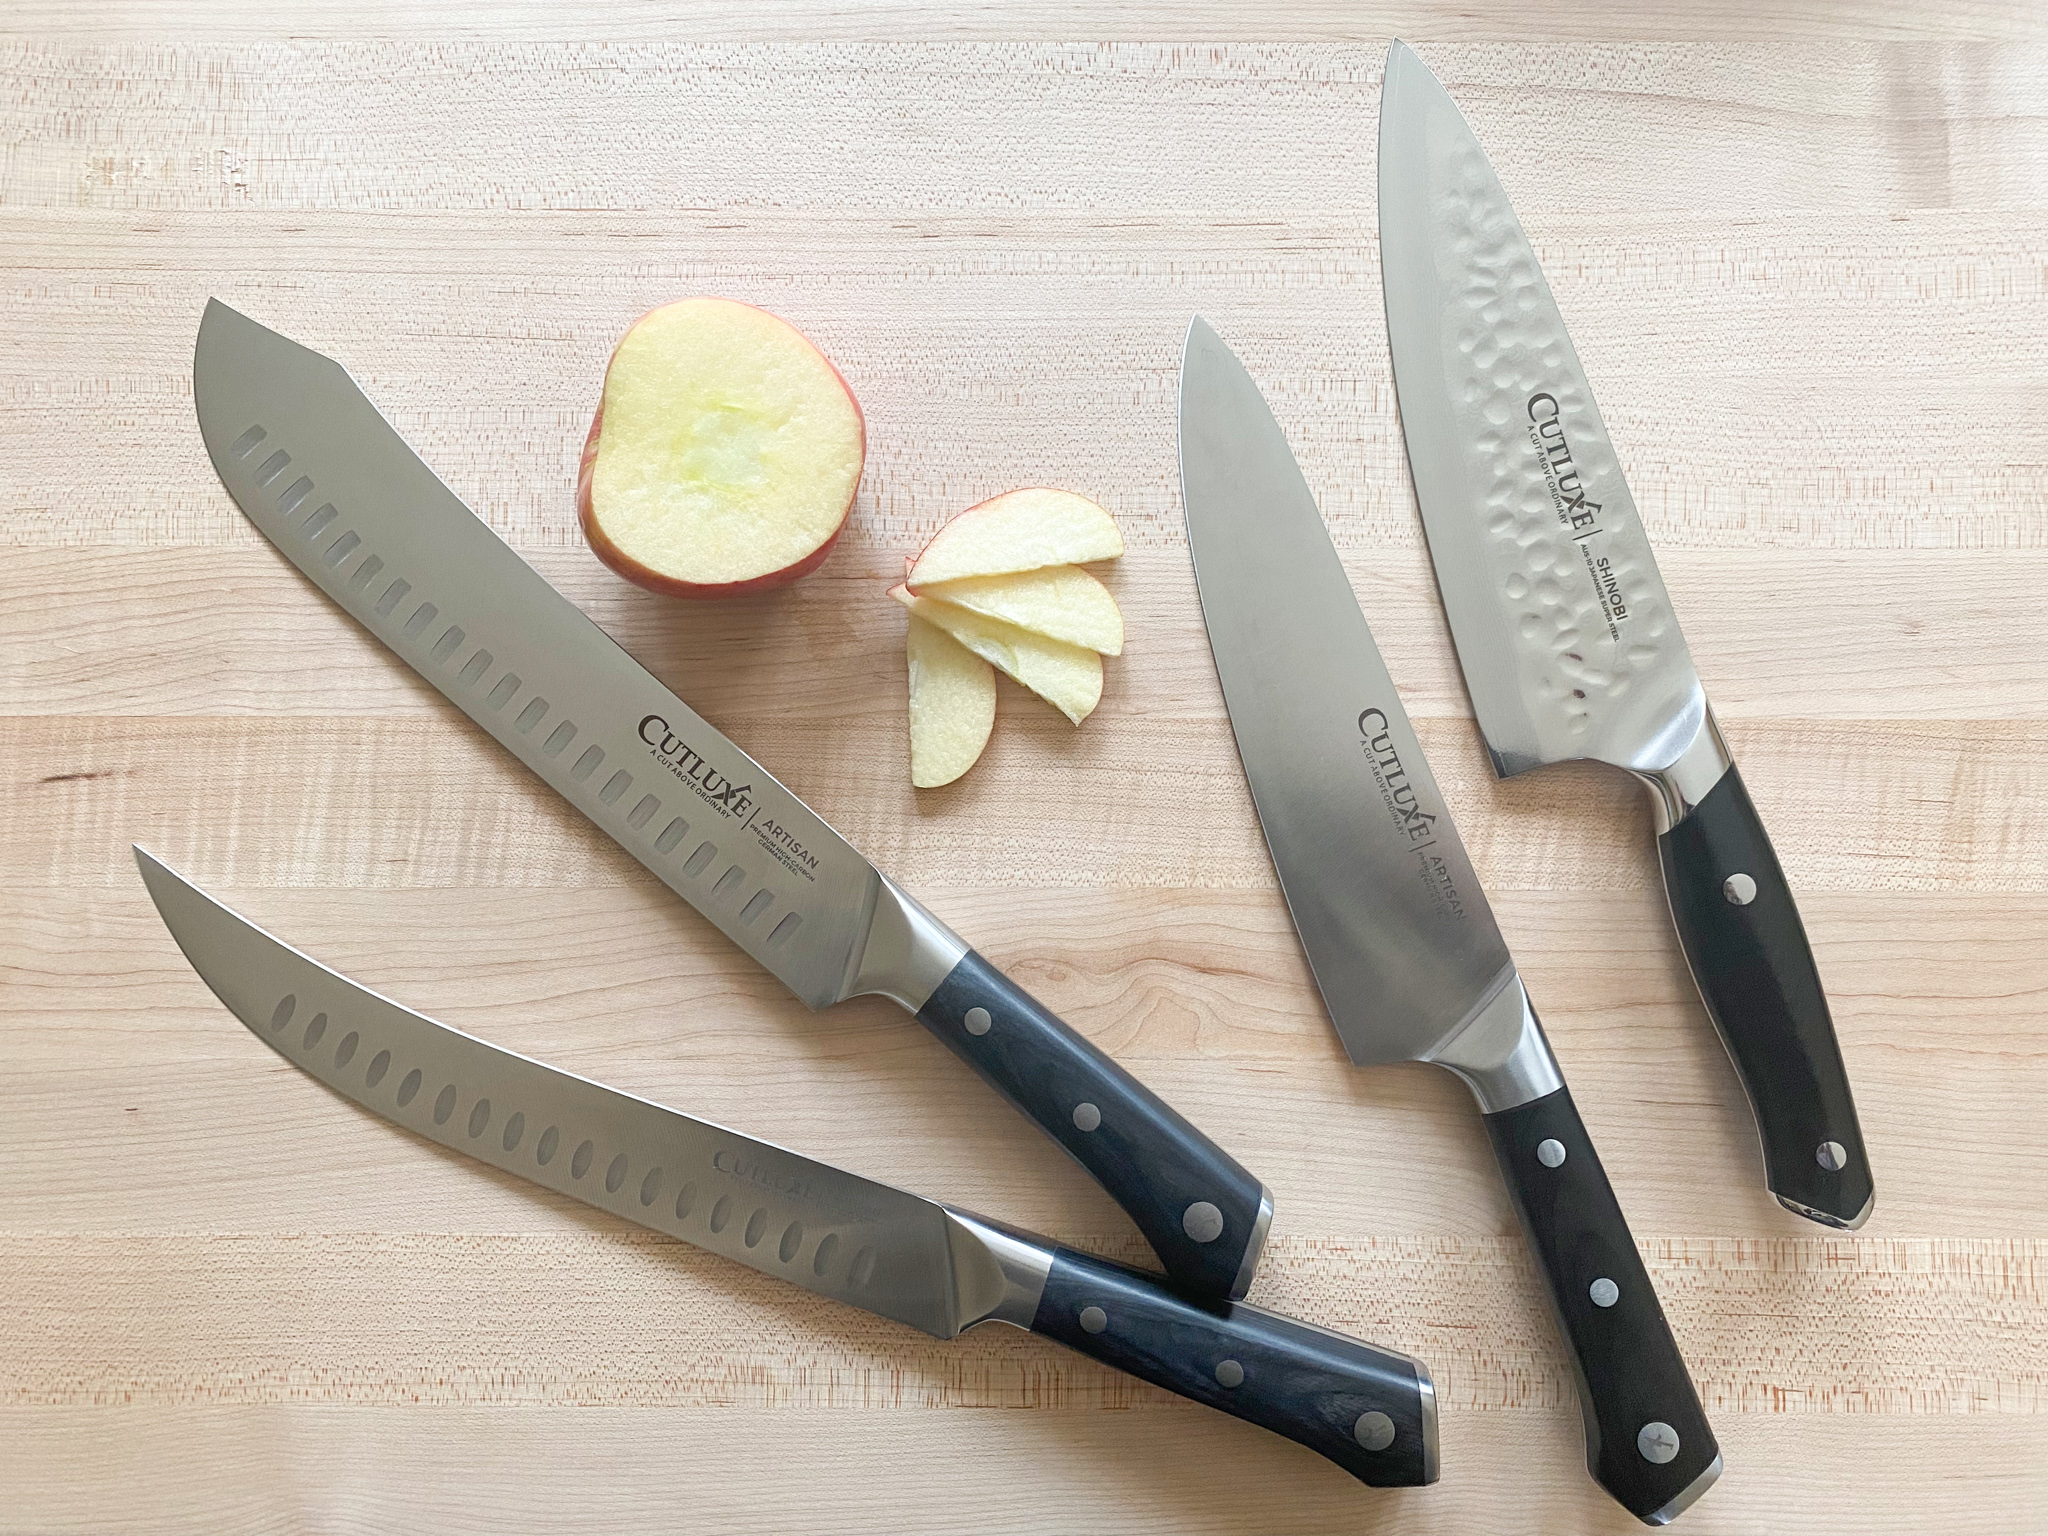 Cutluxe Knives Slice Through the Competition - Food & Nutrition Magazine